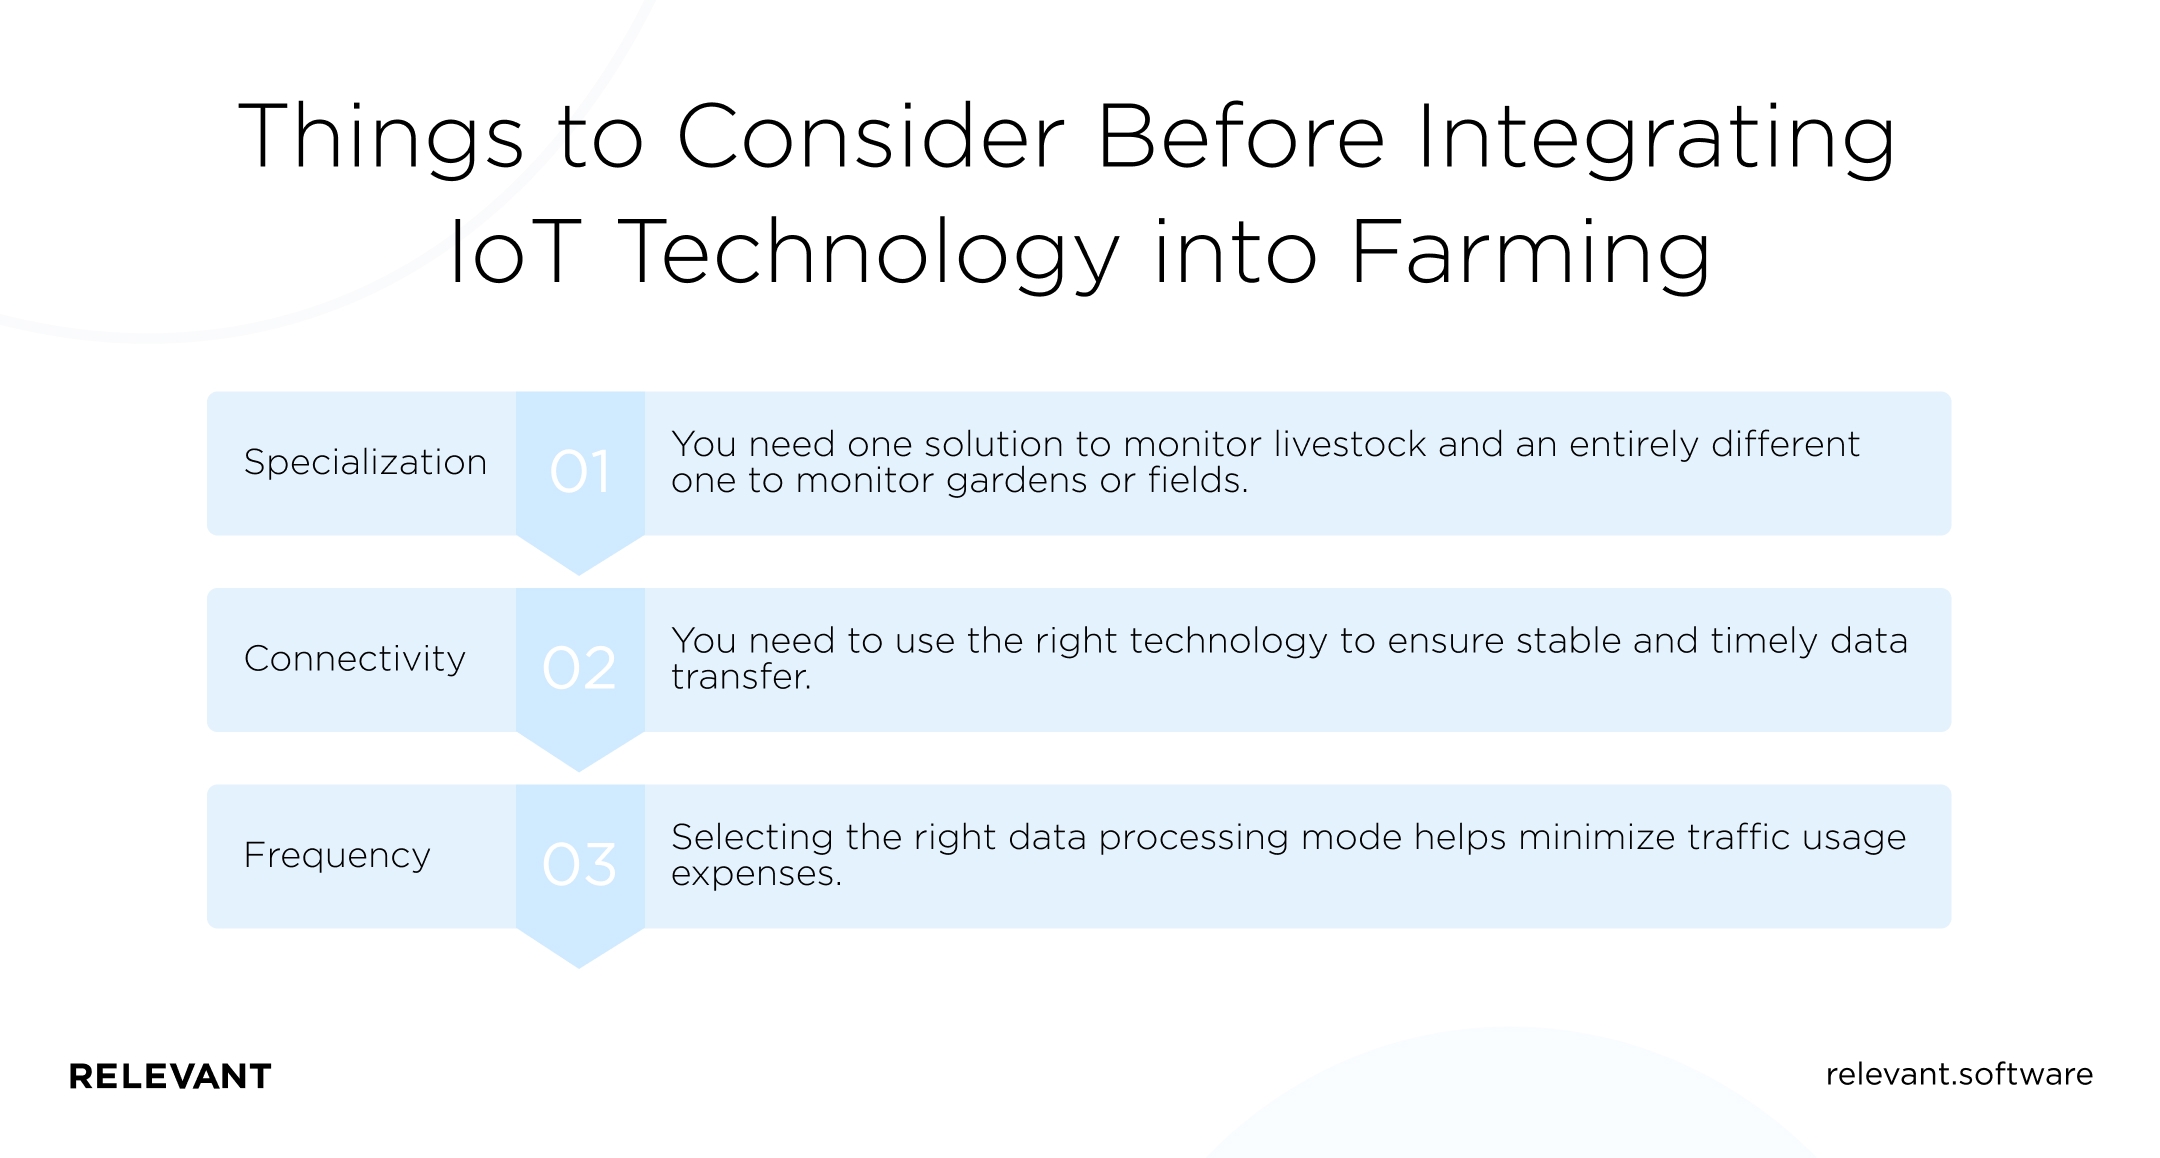 Things to Consider Before Integrating IoT Technology into Farming